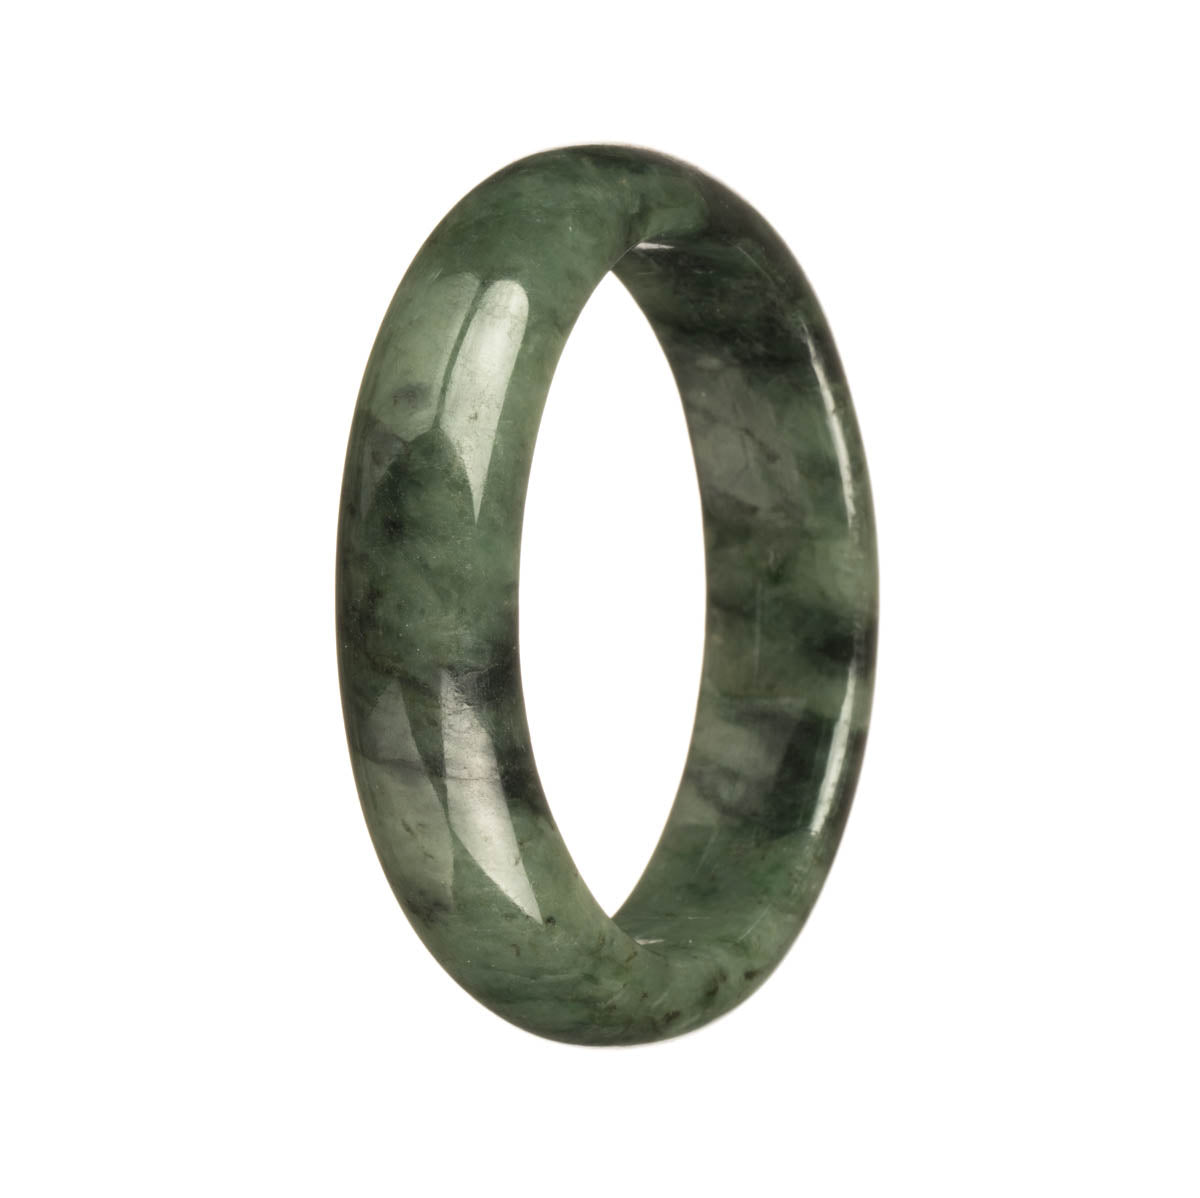 Authentic Type A Green with Dark Green Patterns Traditional Jade Bangle Bracelet - 57mm Half Moon